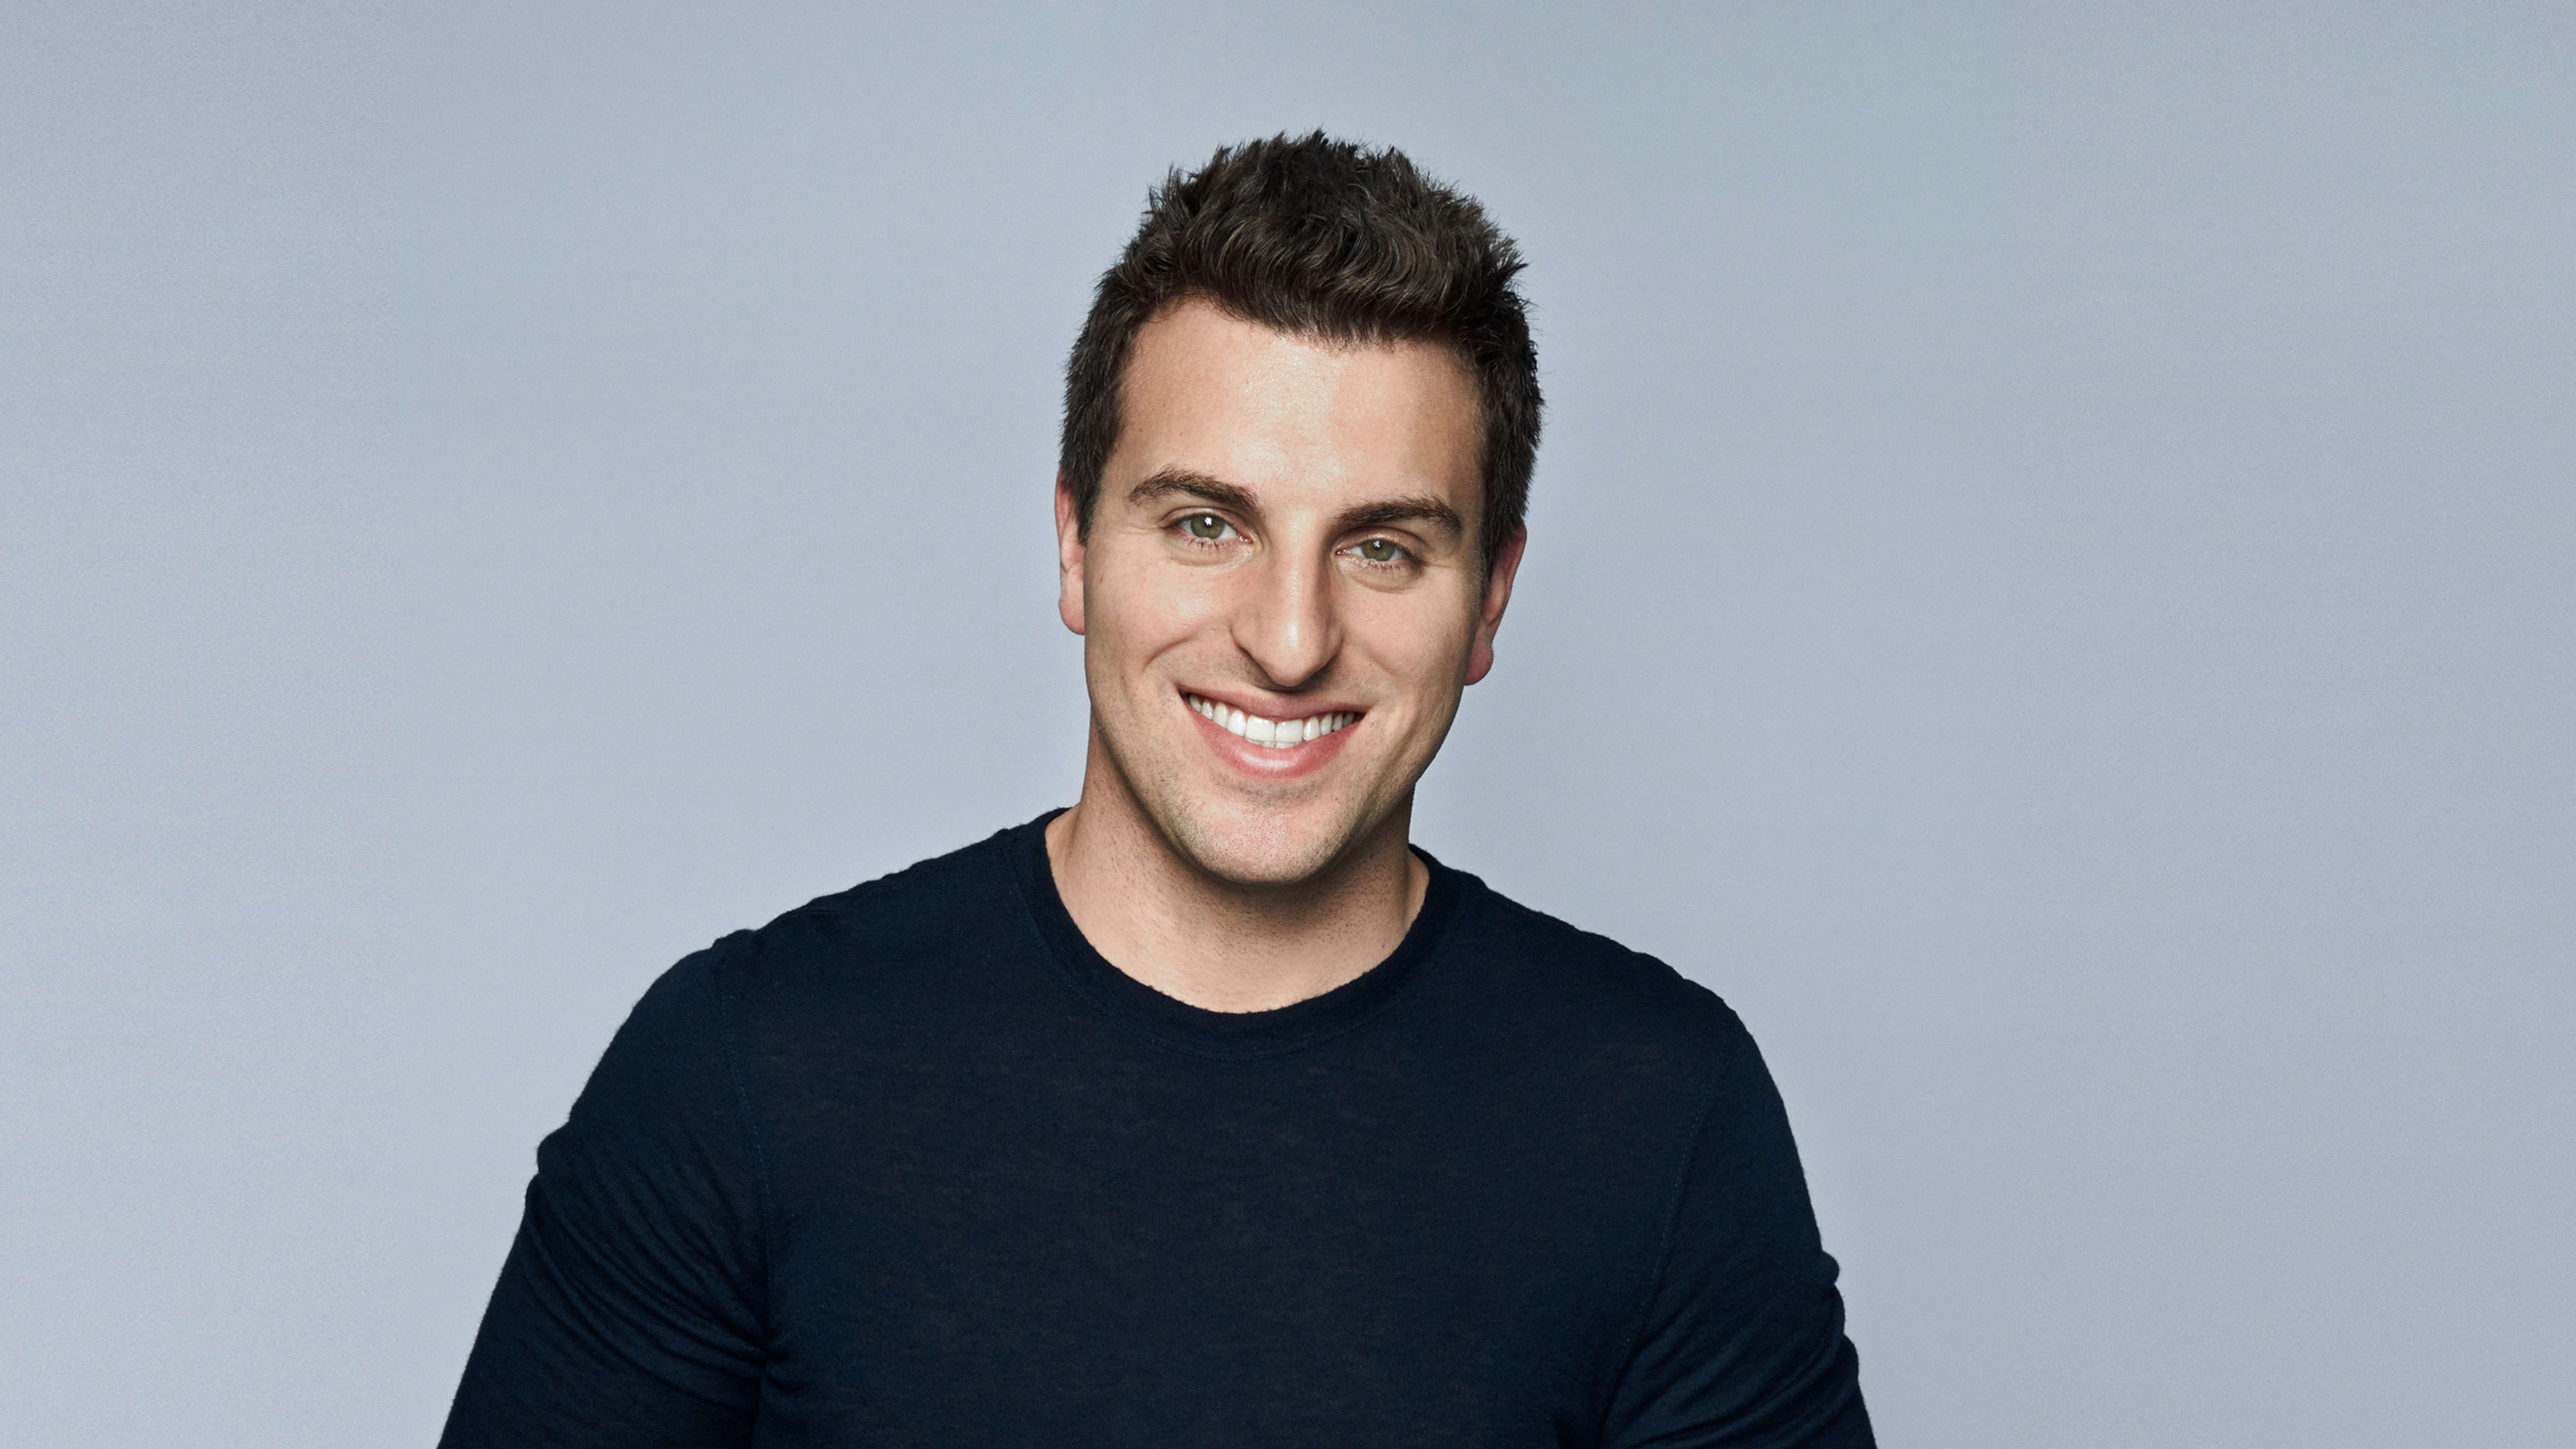 Airbnb CEO Brian Chesky explains the company’s push into IP-driven vacation getaways